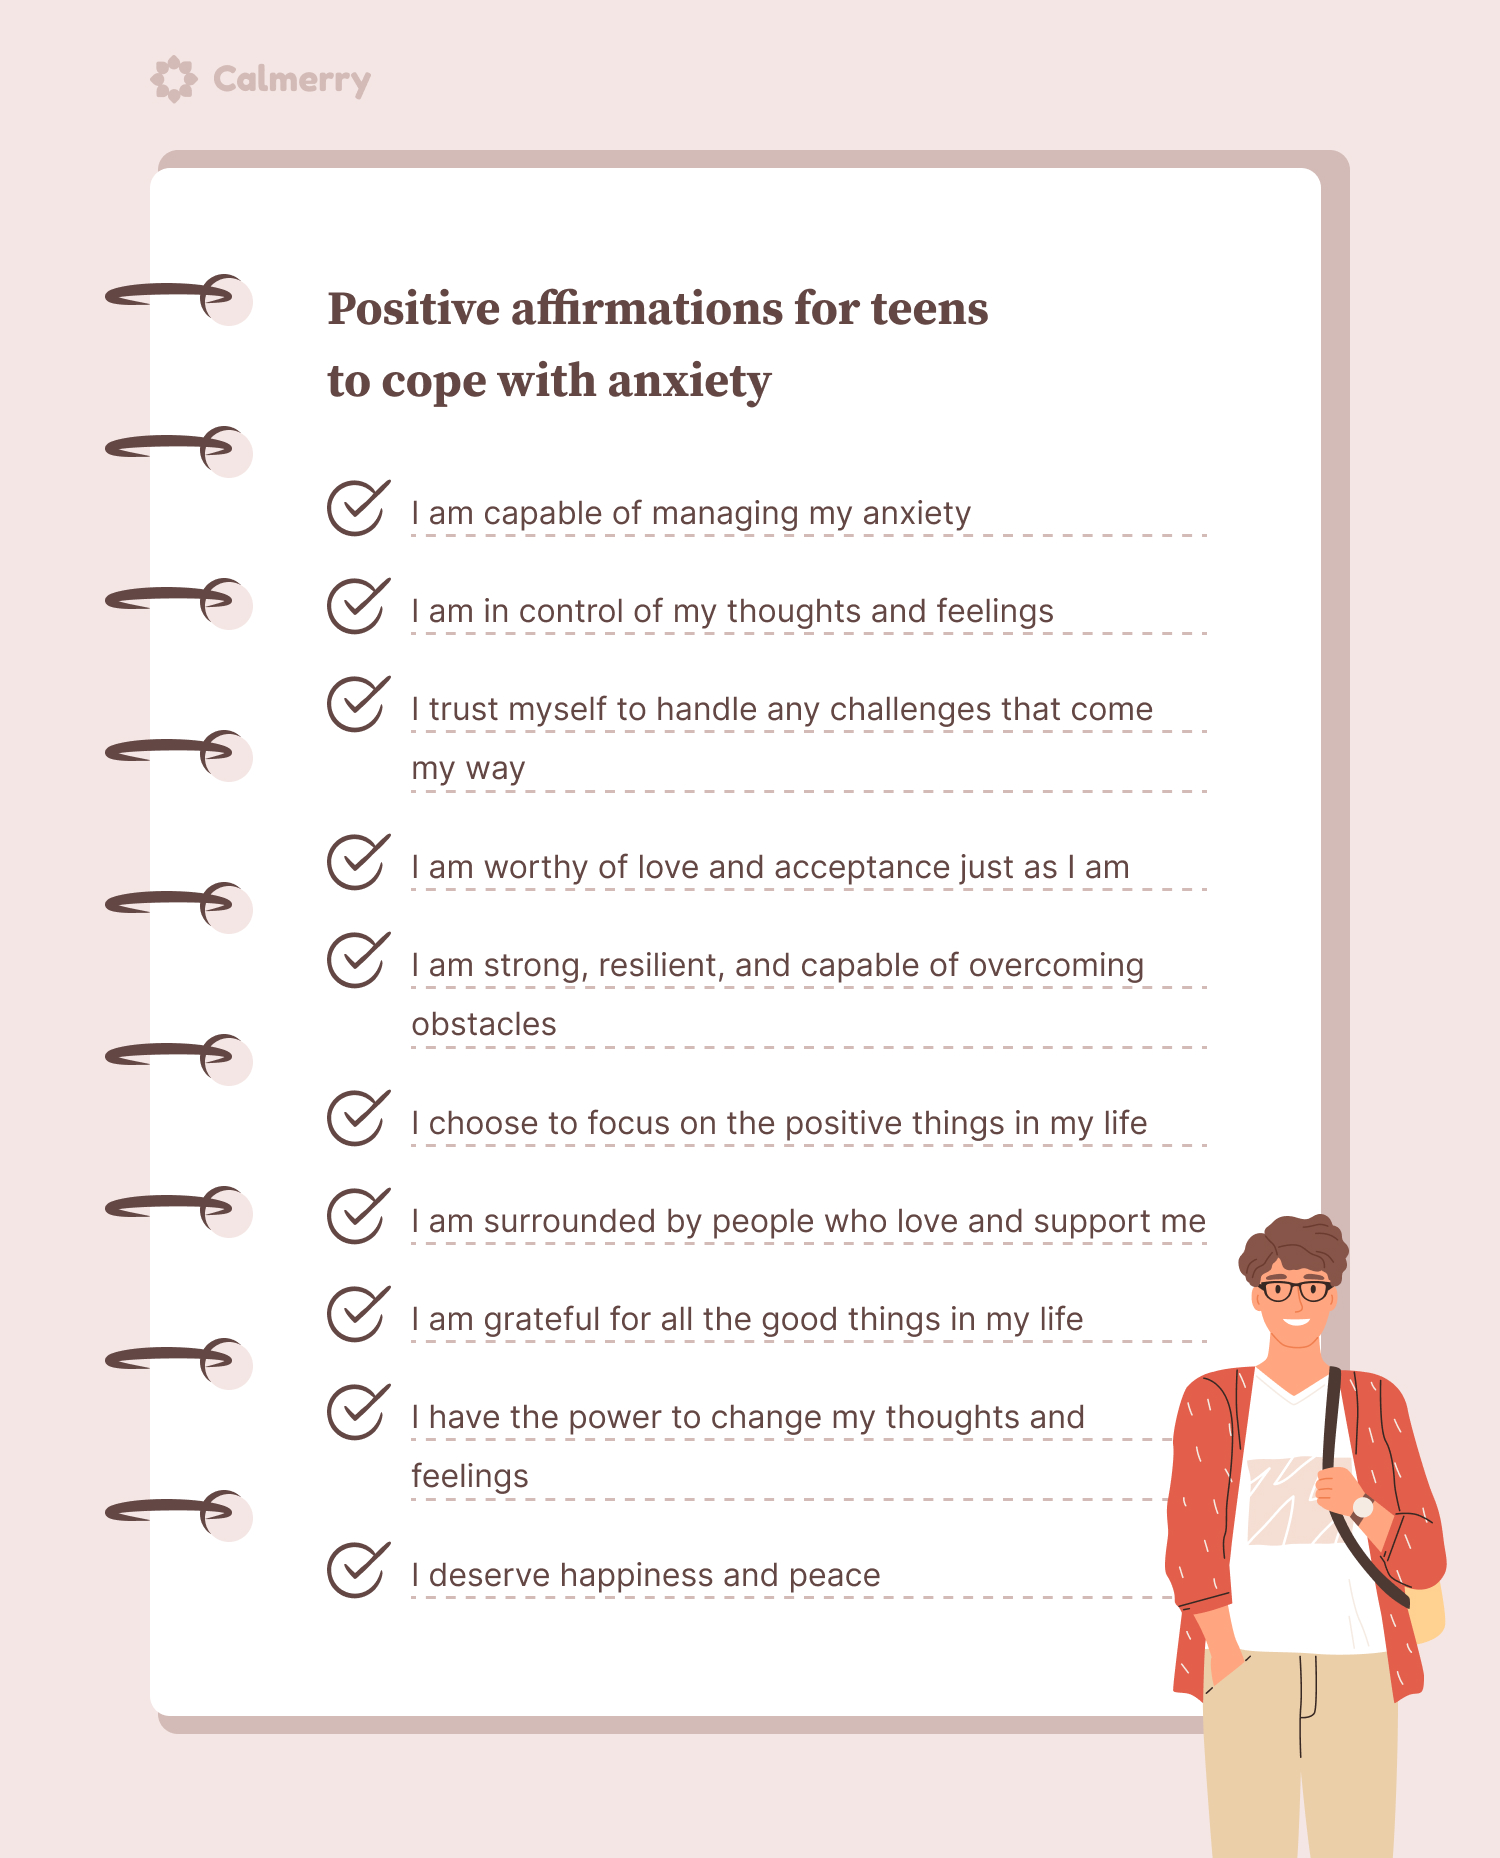 Positive affirmations for anxiety in teens